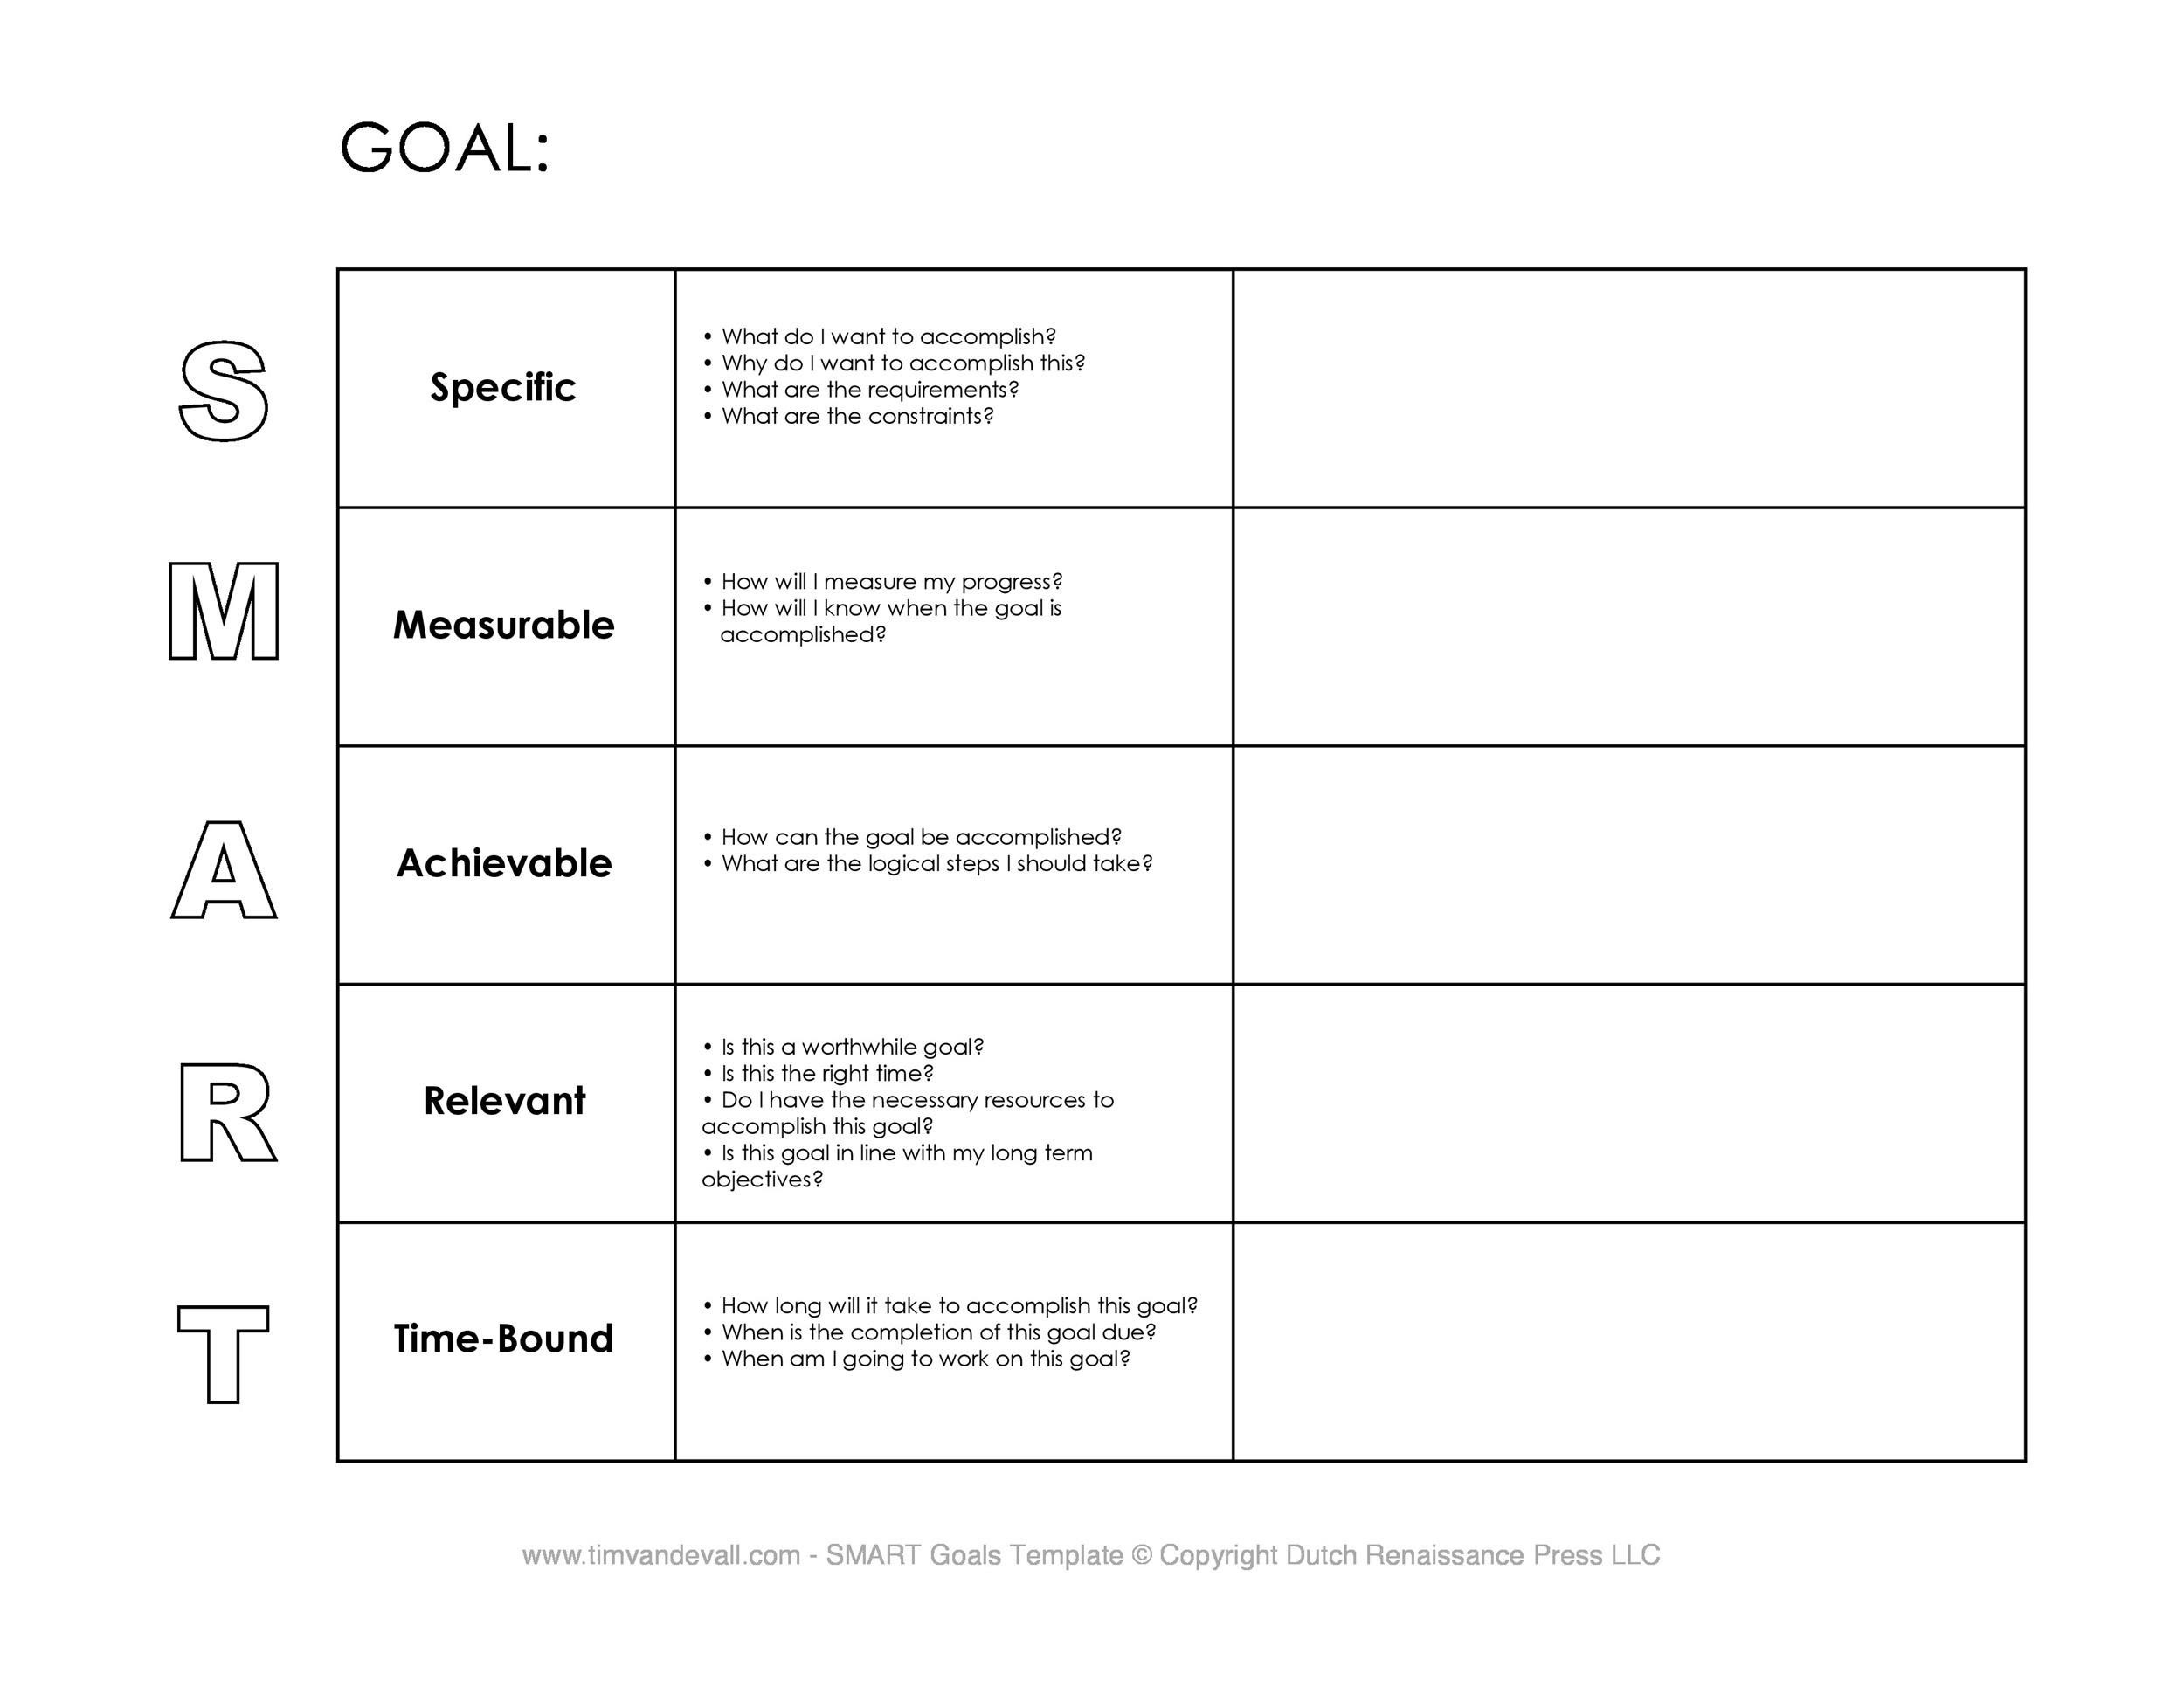 goal-setting-sample-example-of-goals-and-objectives-master-template